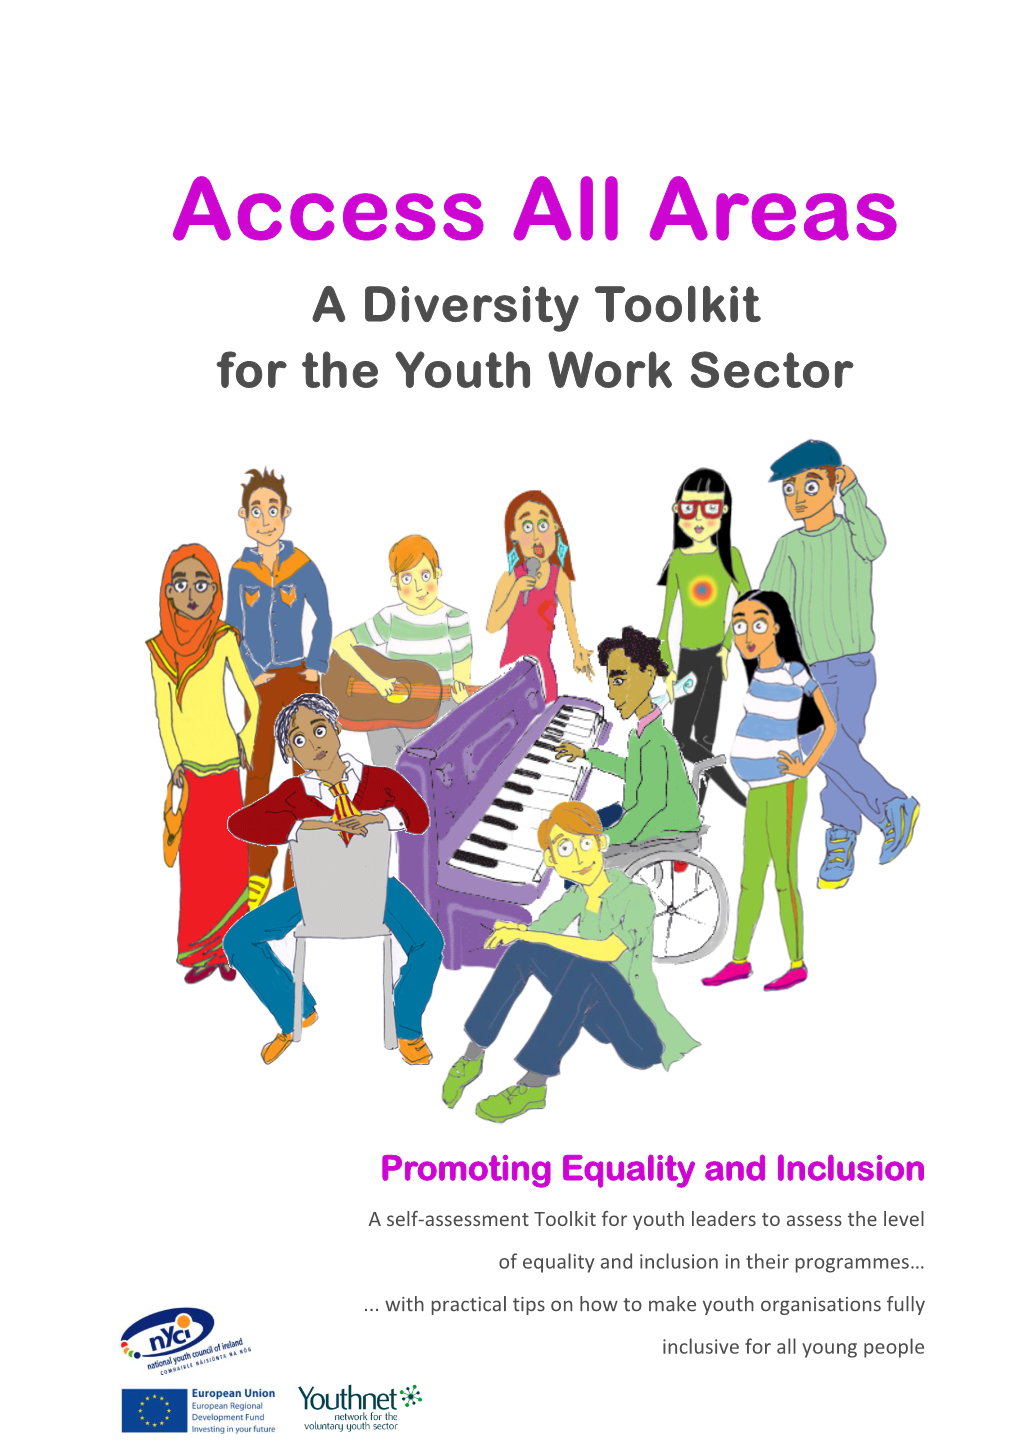 Access All Areas a Diversity Toolkit for the Youth Work Sector